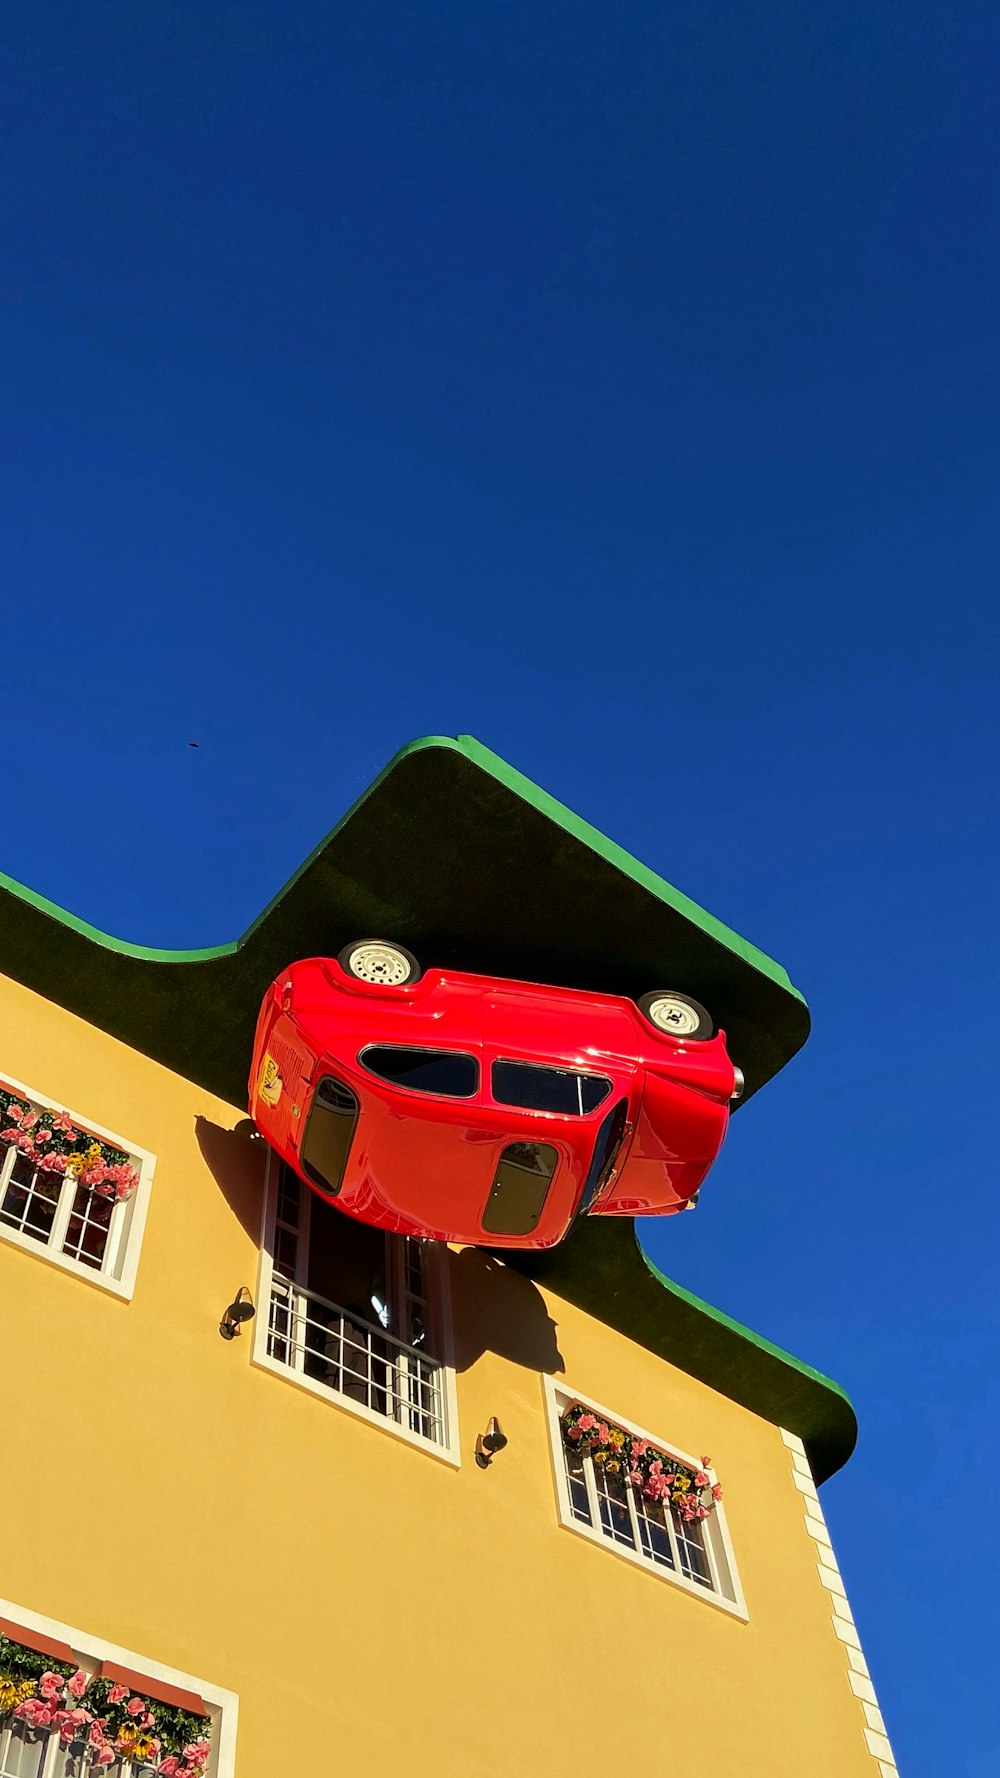 a red car on a yellow building